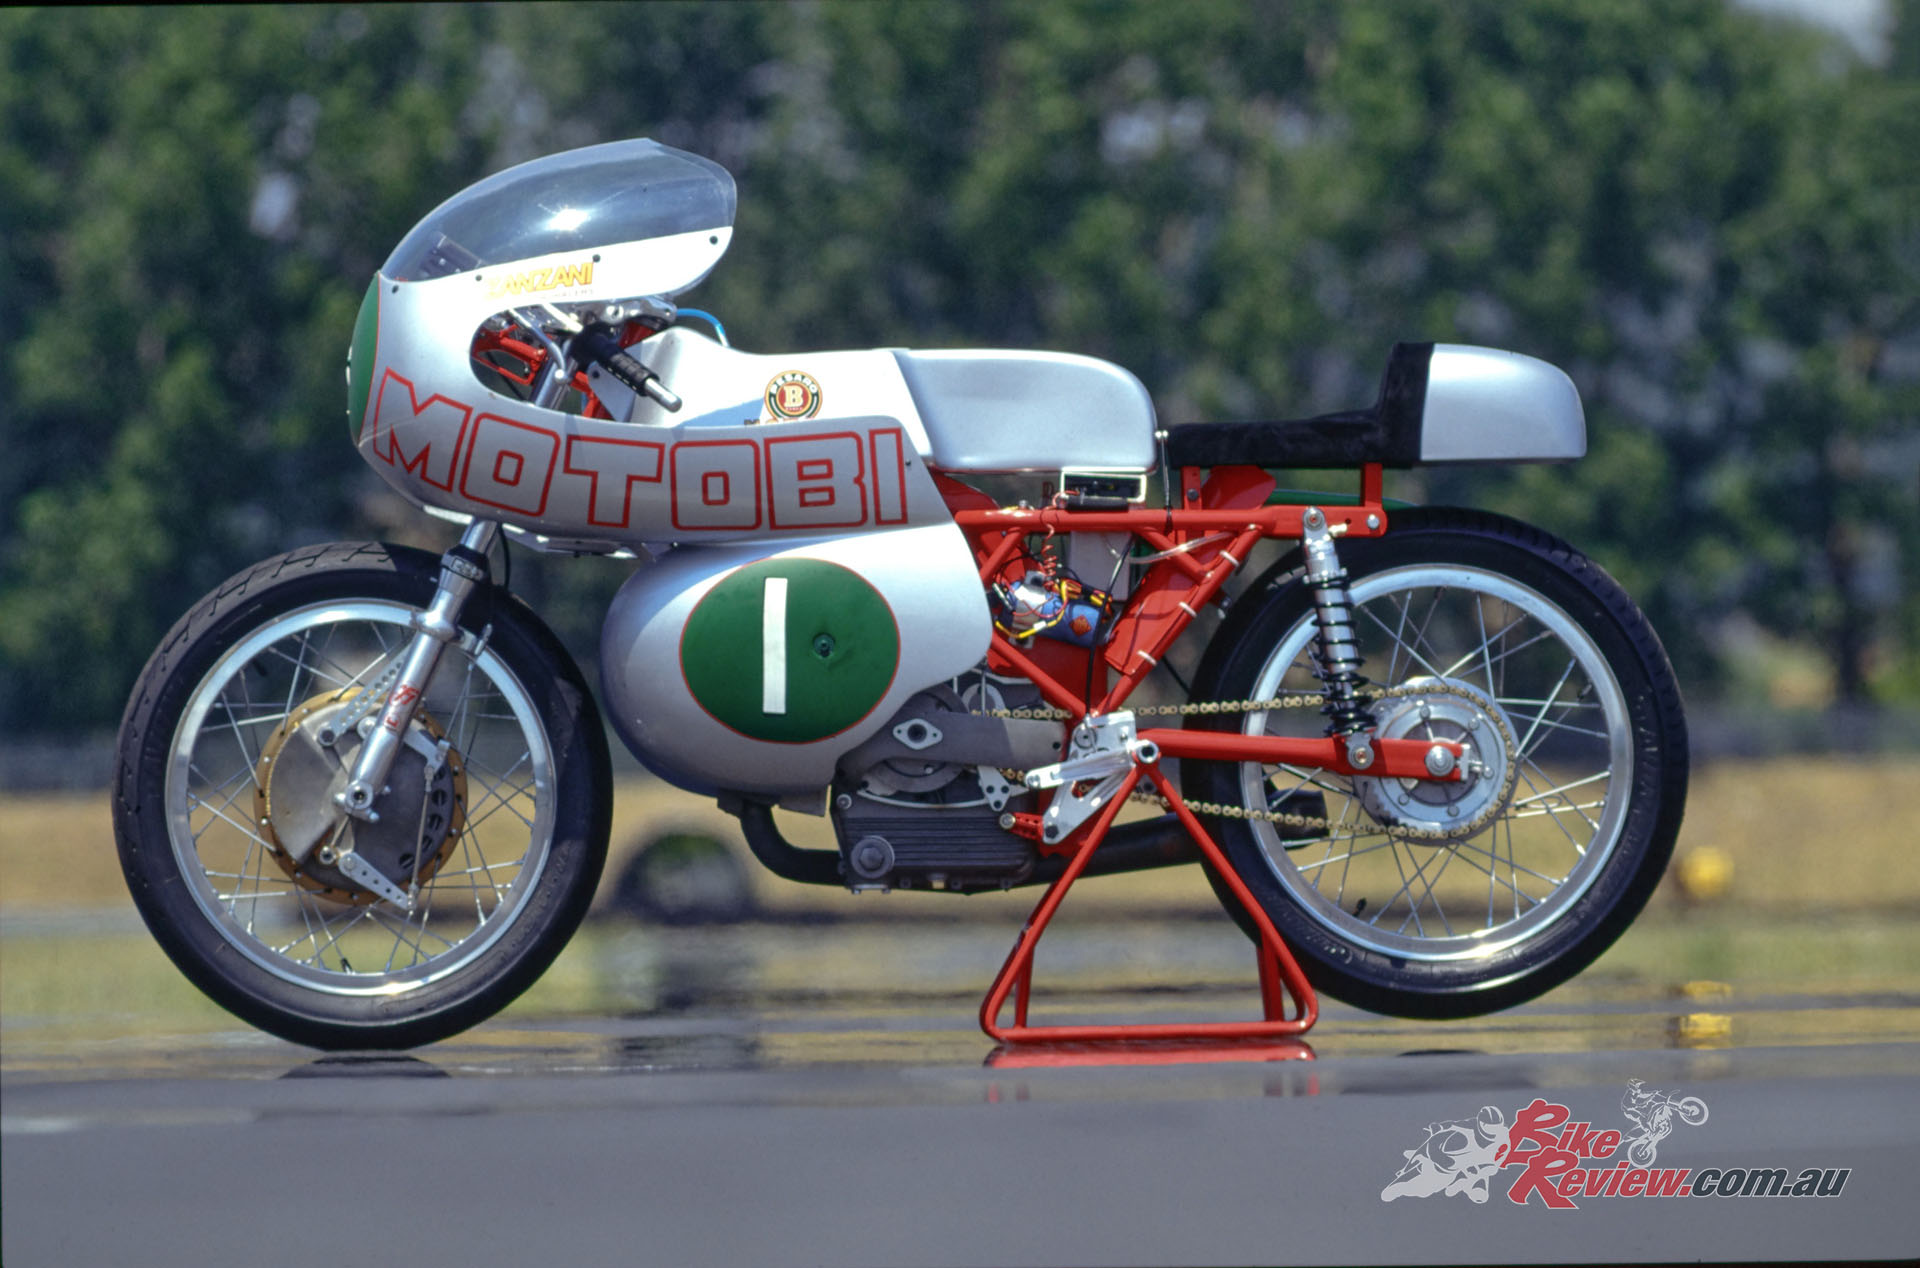 Obscure? Cool? Extremely Italian? We dive into the little-know brand of MotoBi!